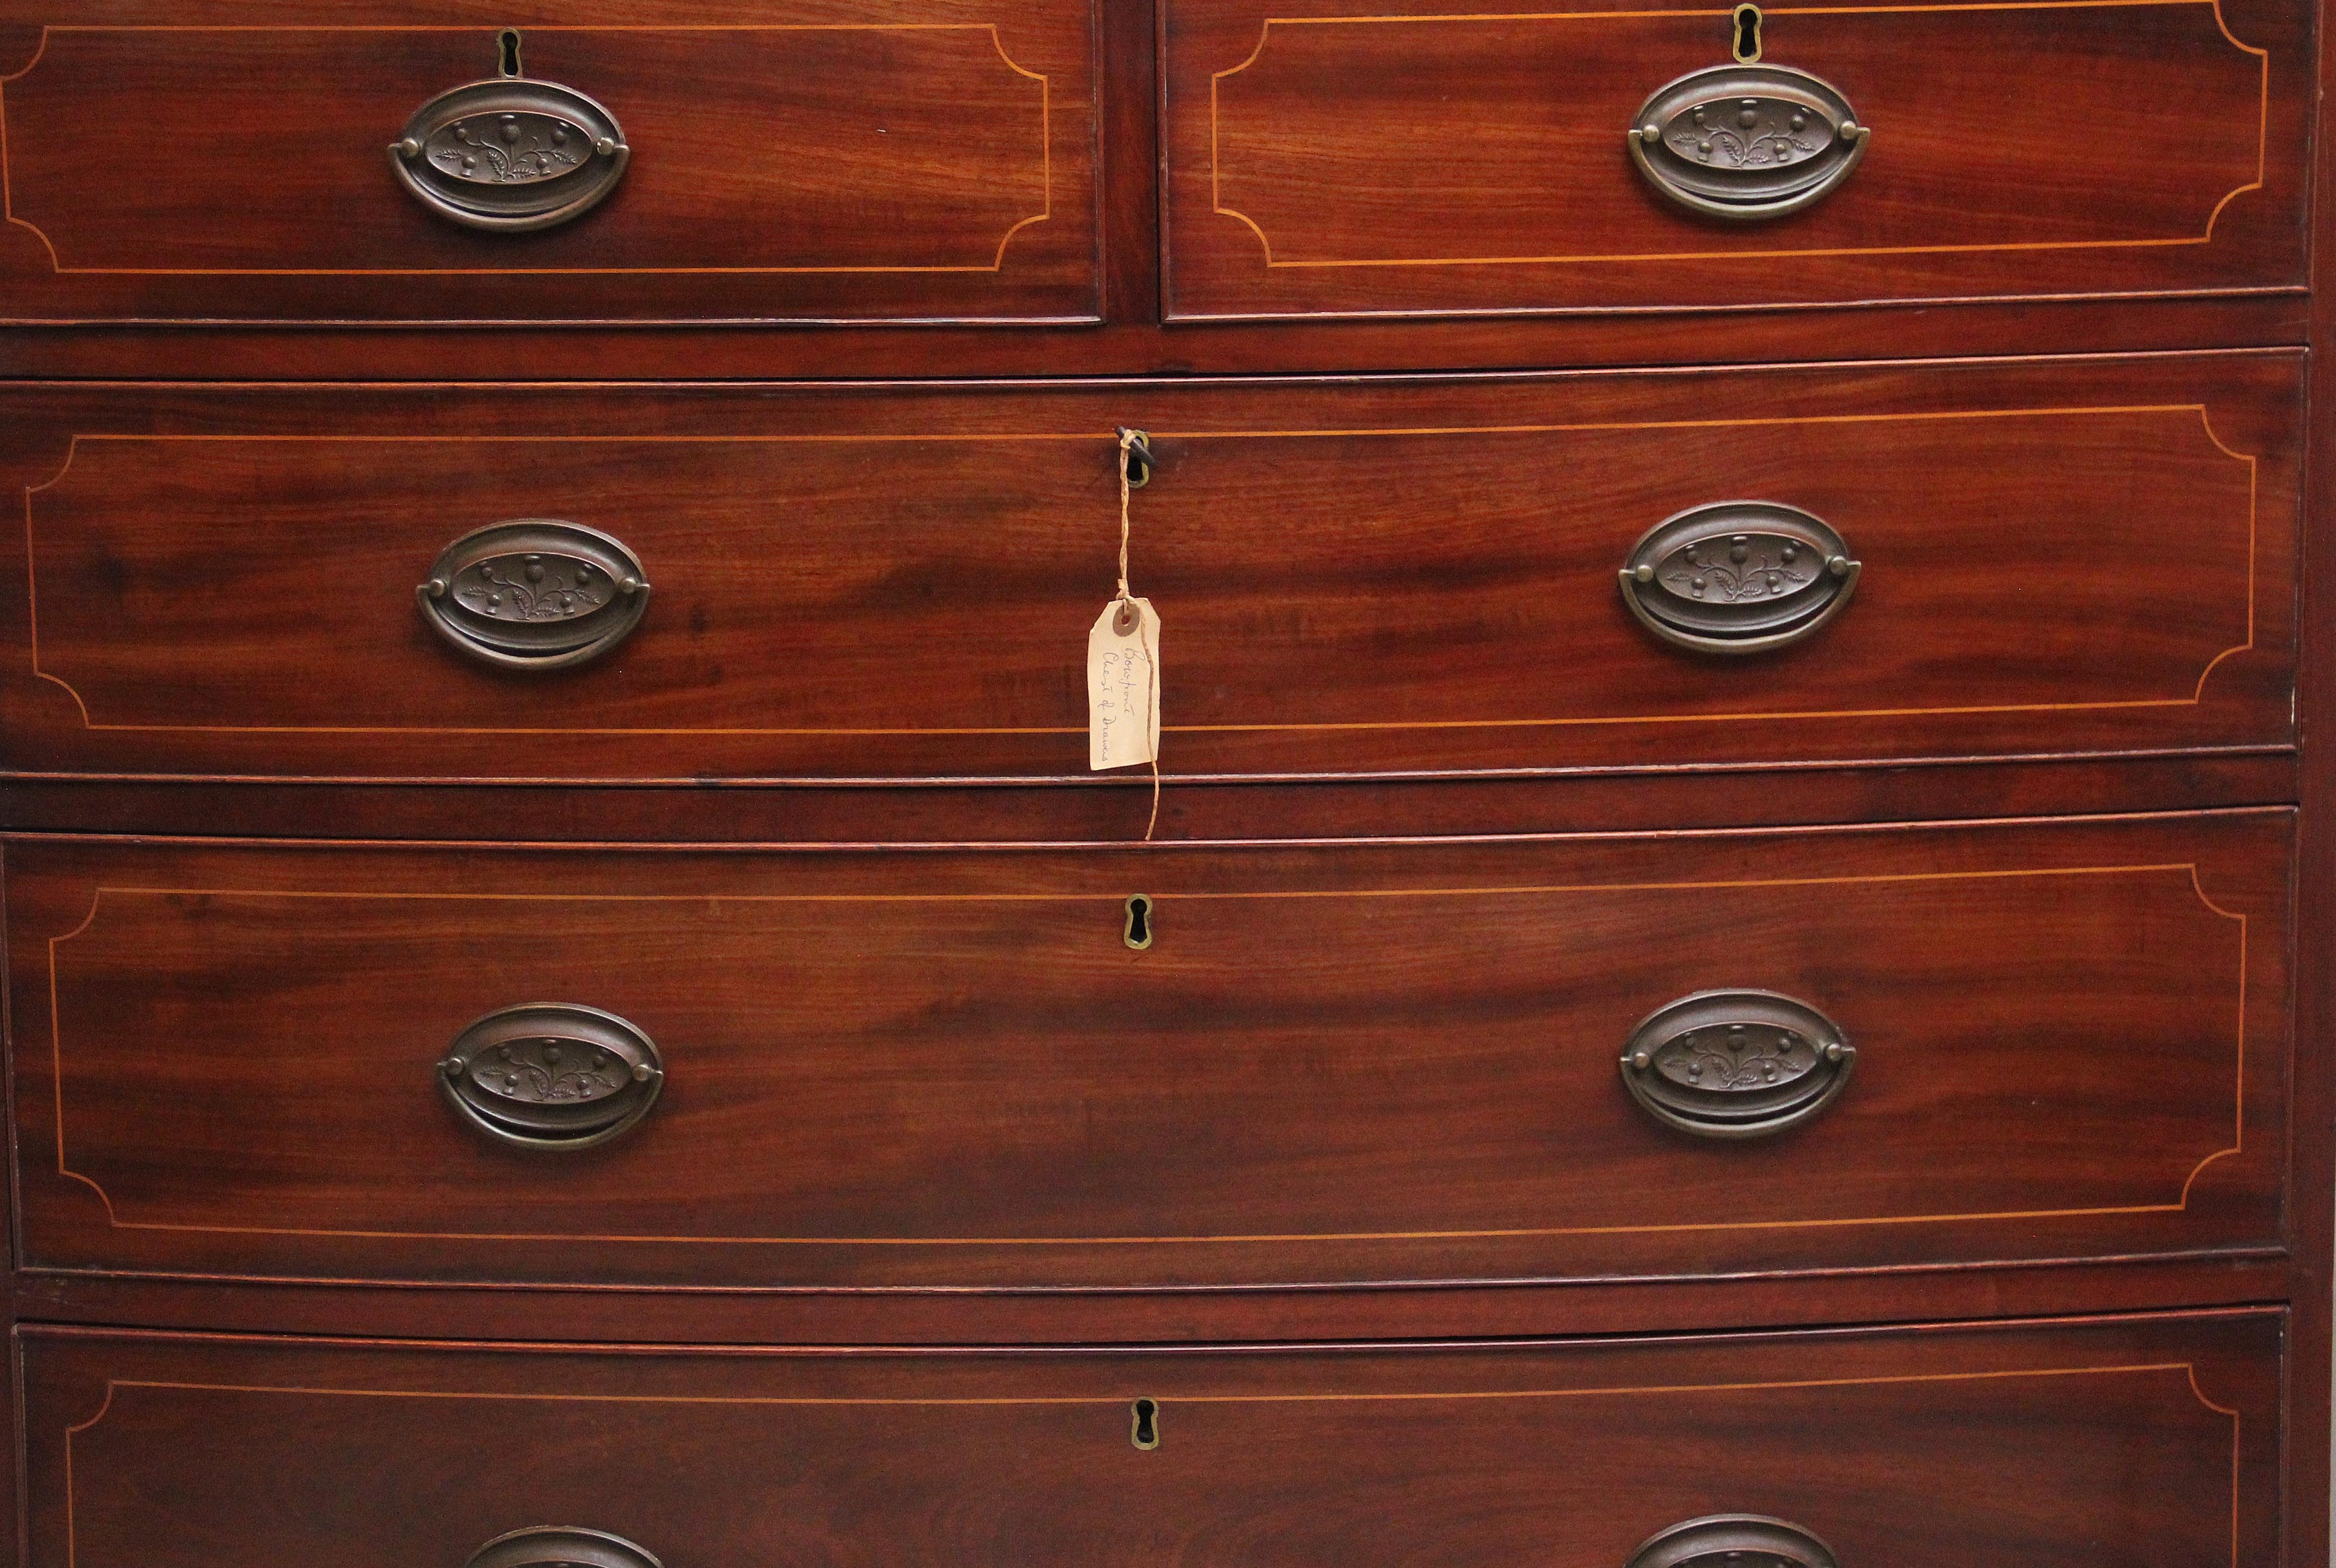 Early 19th Century inlaid mahogany bowfront chest of drawers, having a nice figured top above a selection of two short over three long graduated drawers with oval brass handles, nice decorative inlay on the drawer fronts, shaped apron below and